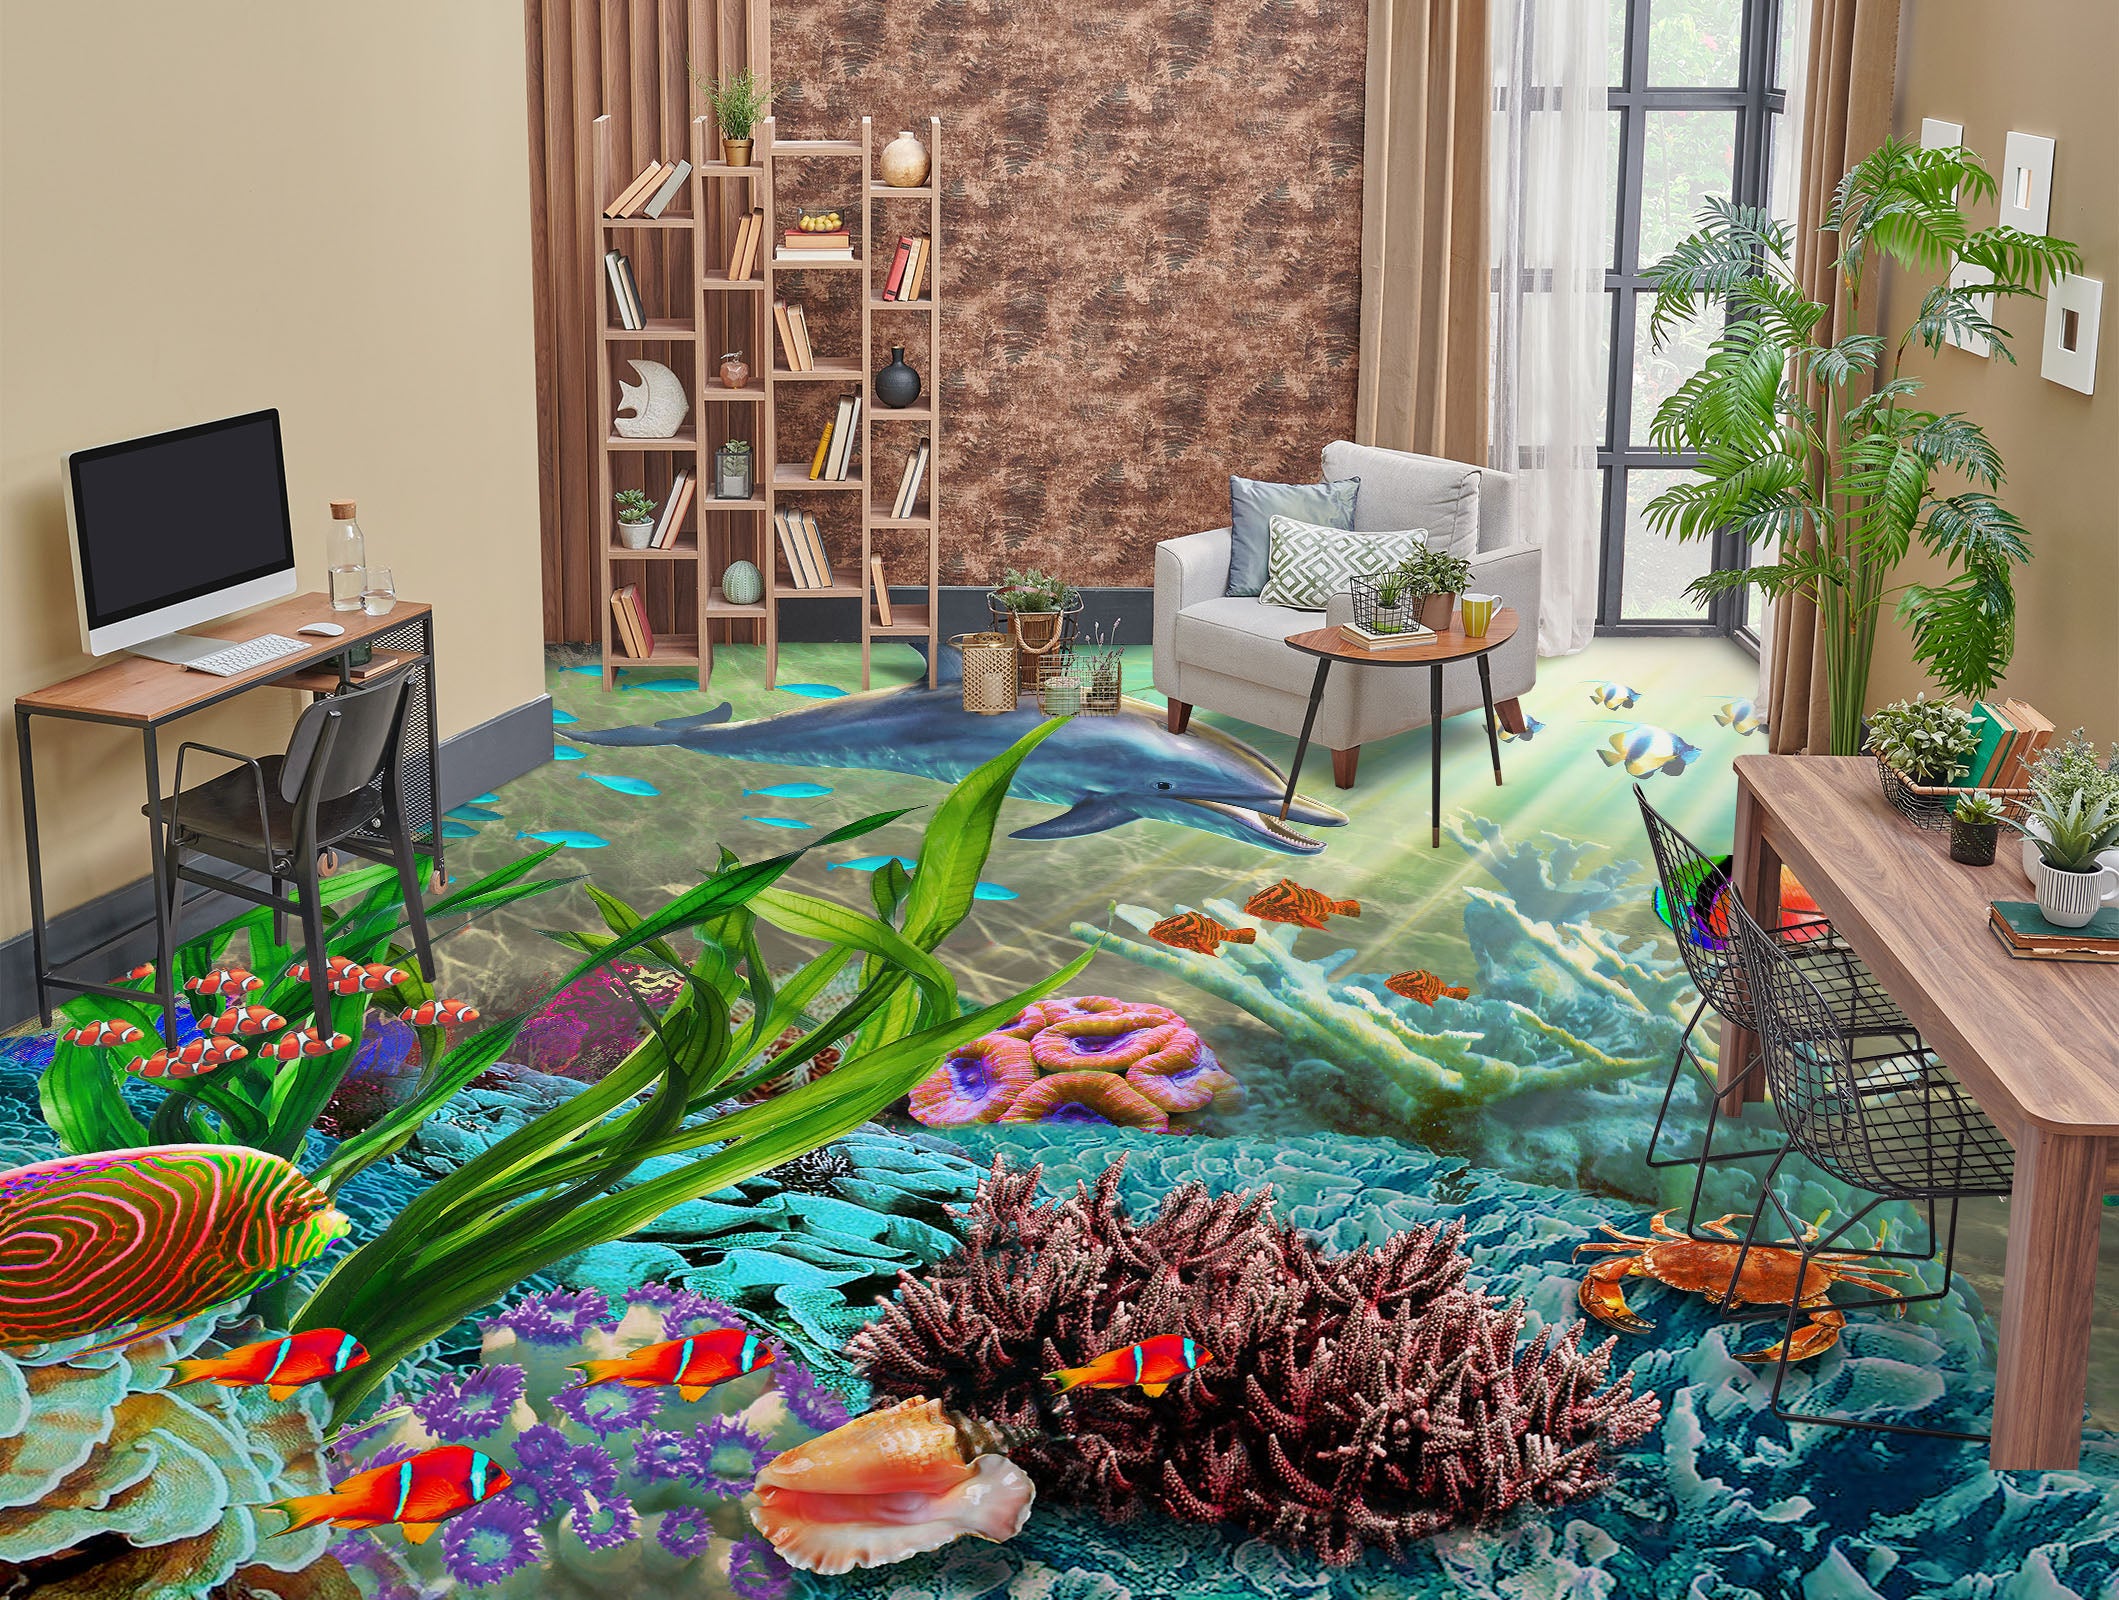 3D Seabed Seaweed Coral Fish 98166 Adrian Chesterman Floor Mural  Wallpaper Murals Self-Adhesive Removable Print Epoxy